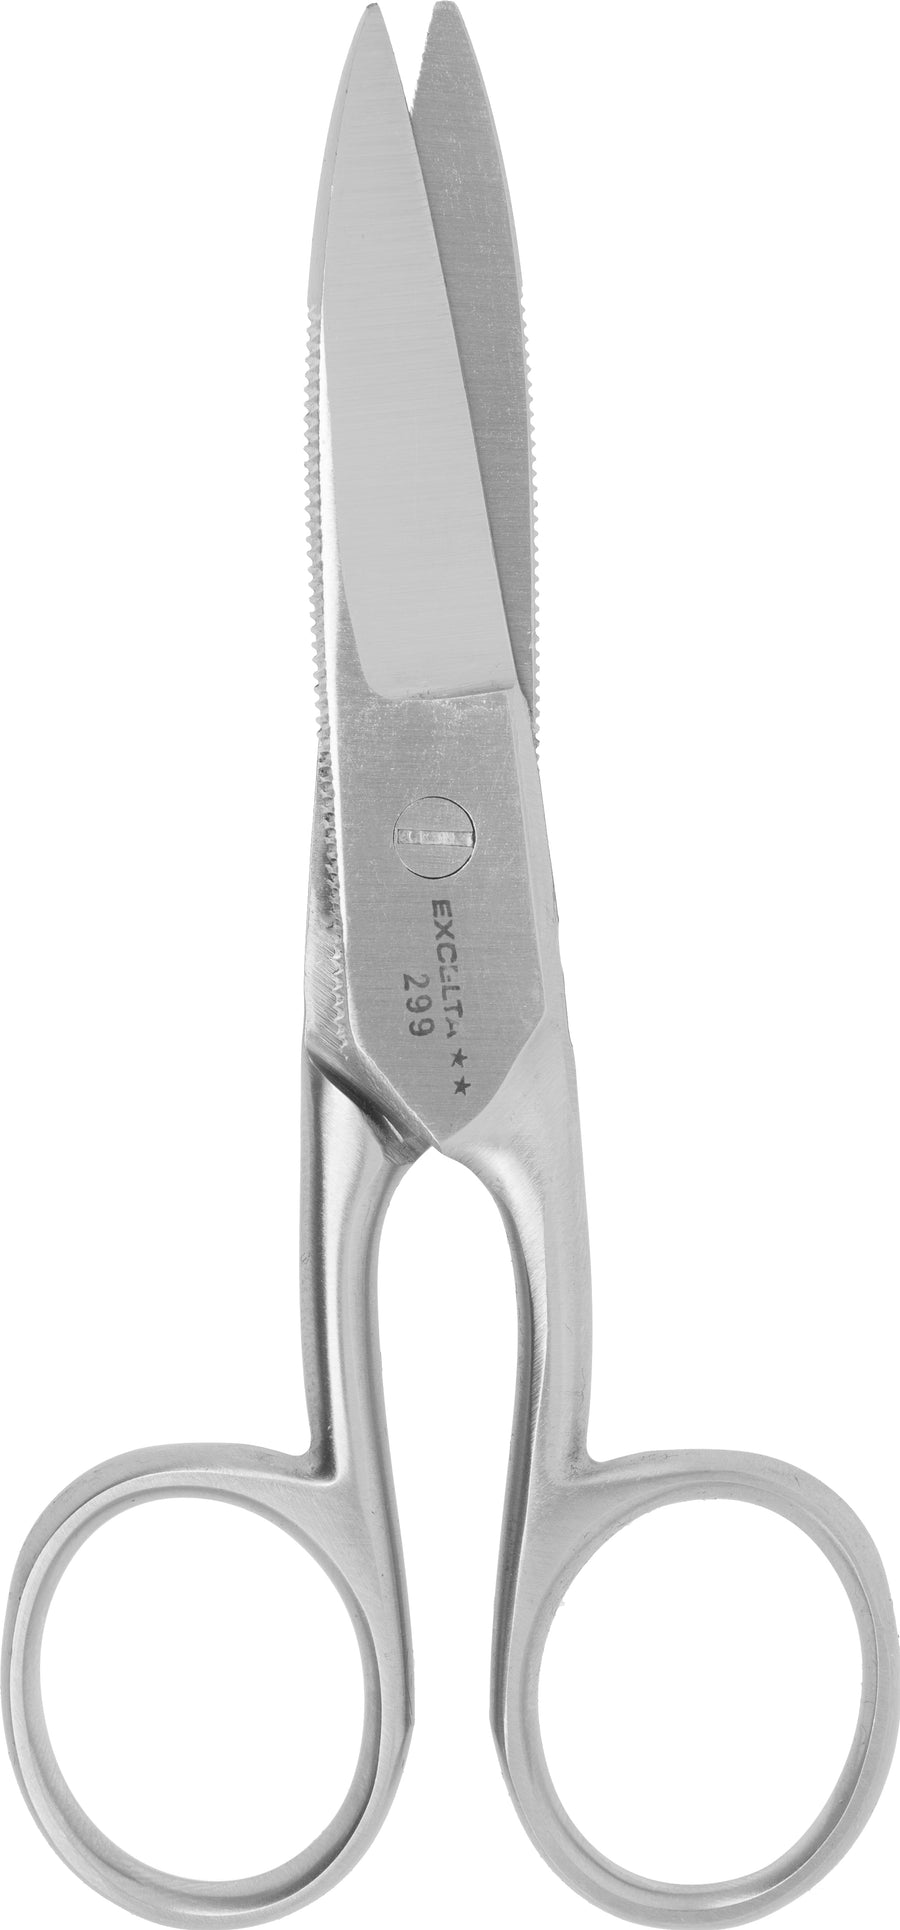 Excelta 299 Scissors - Electrician - Straight 1.75 inch  Blade - SS - Oal 5 inch